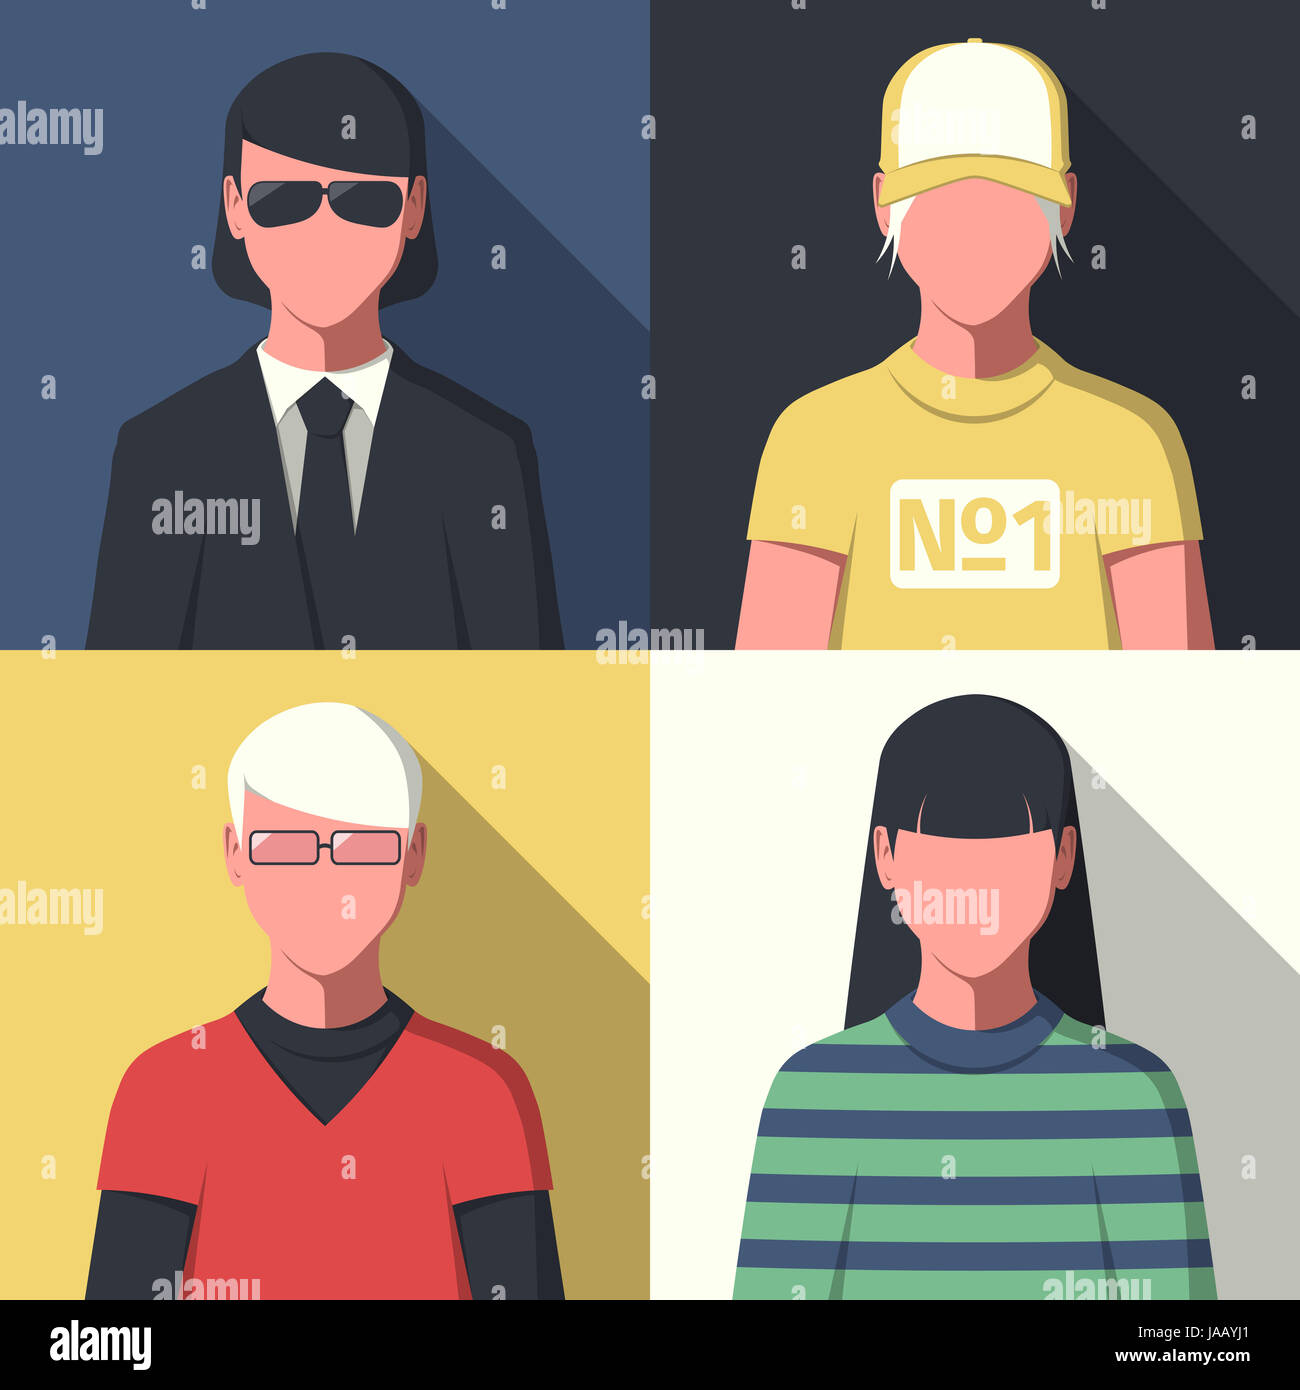 Portraits of people in flat style for profile picture. Avatar icons. Stock Photo